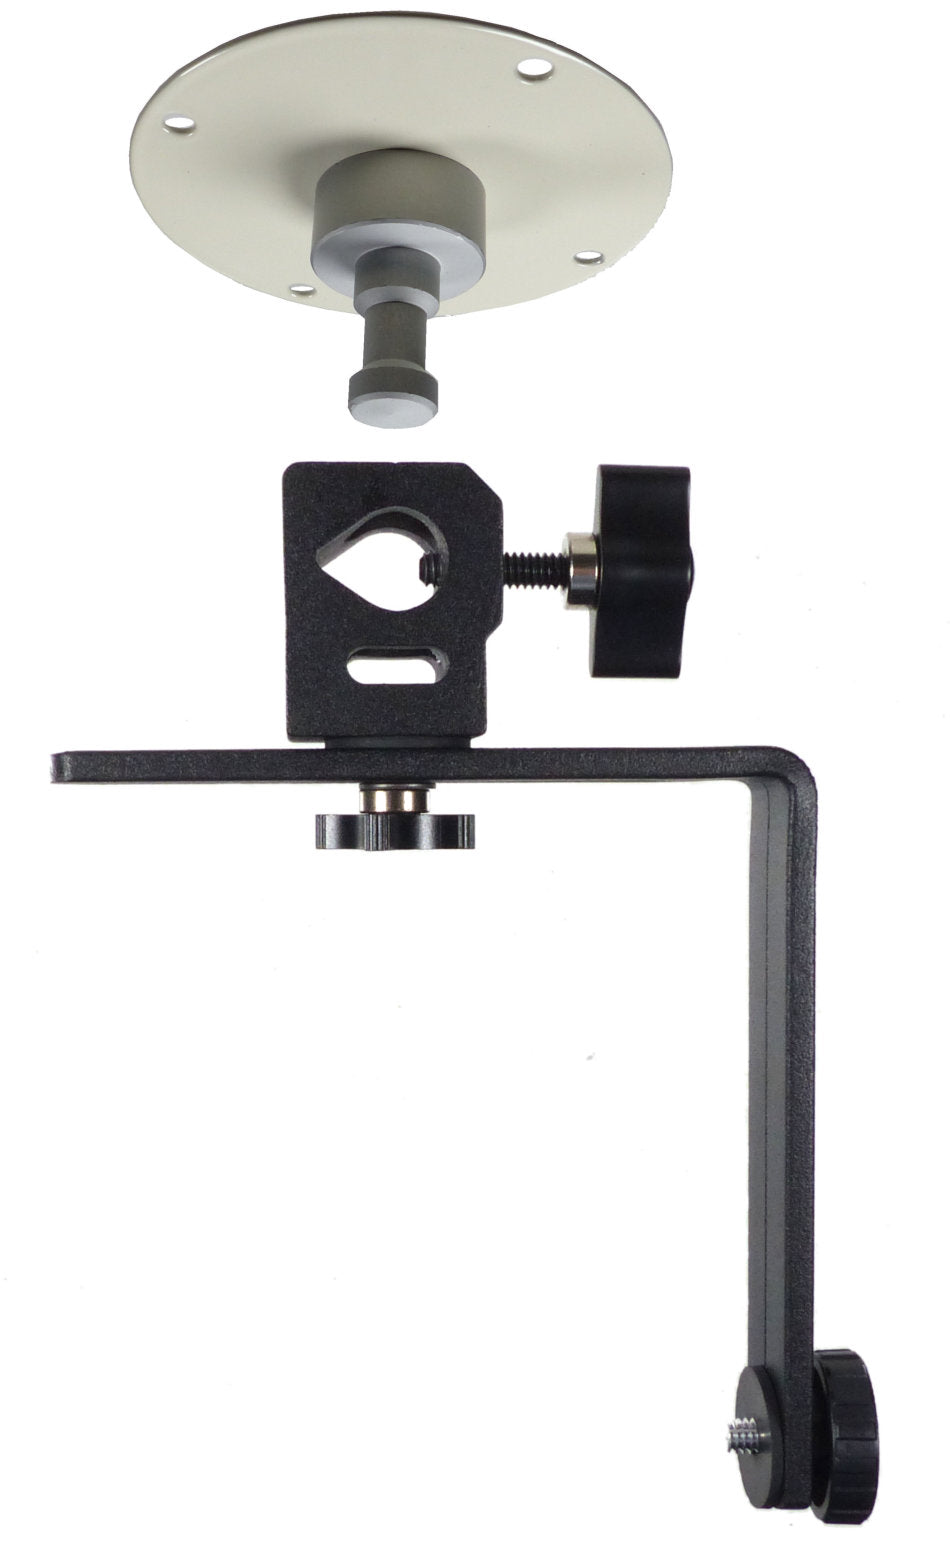 Suspended Drop Ceiling Face Down Camera Mount Alzo Digital